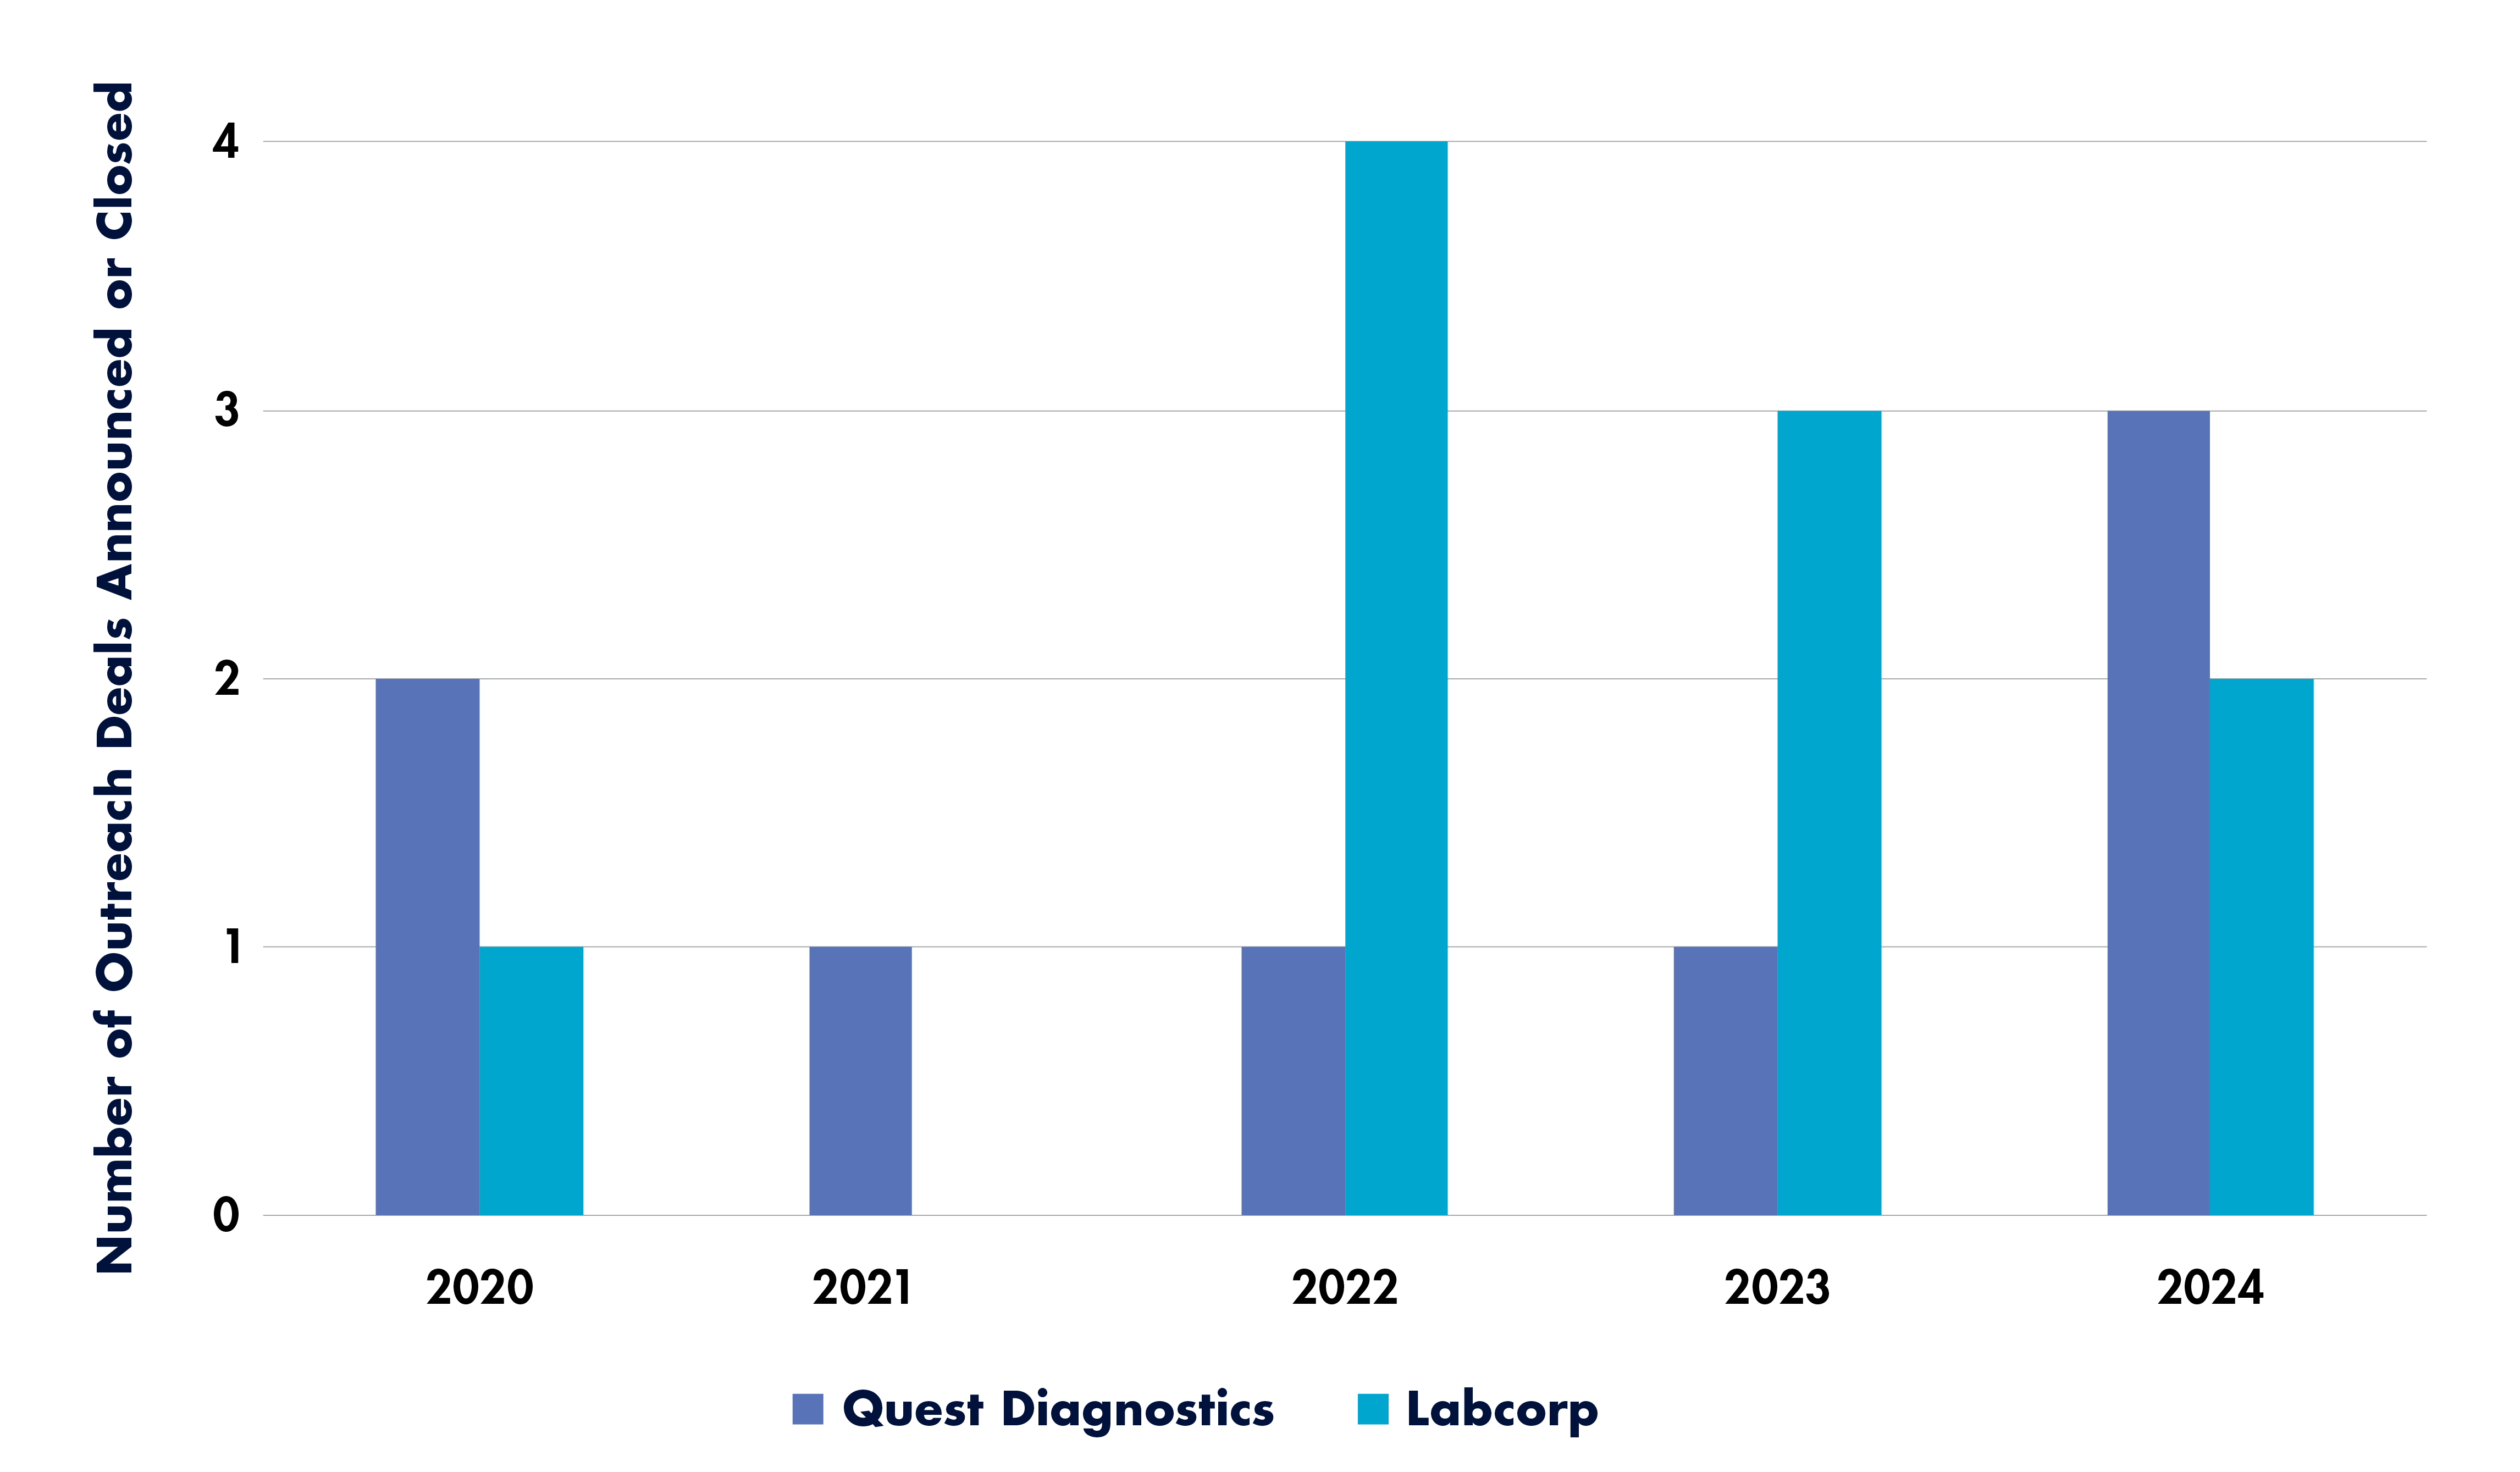 A bar graph in two shades of blue showing the number of lab outreach deals closed by Quest Diagnostics and Labcorp from 2020 to 2024.